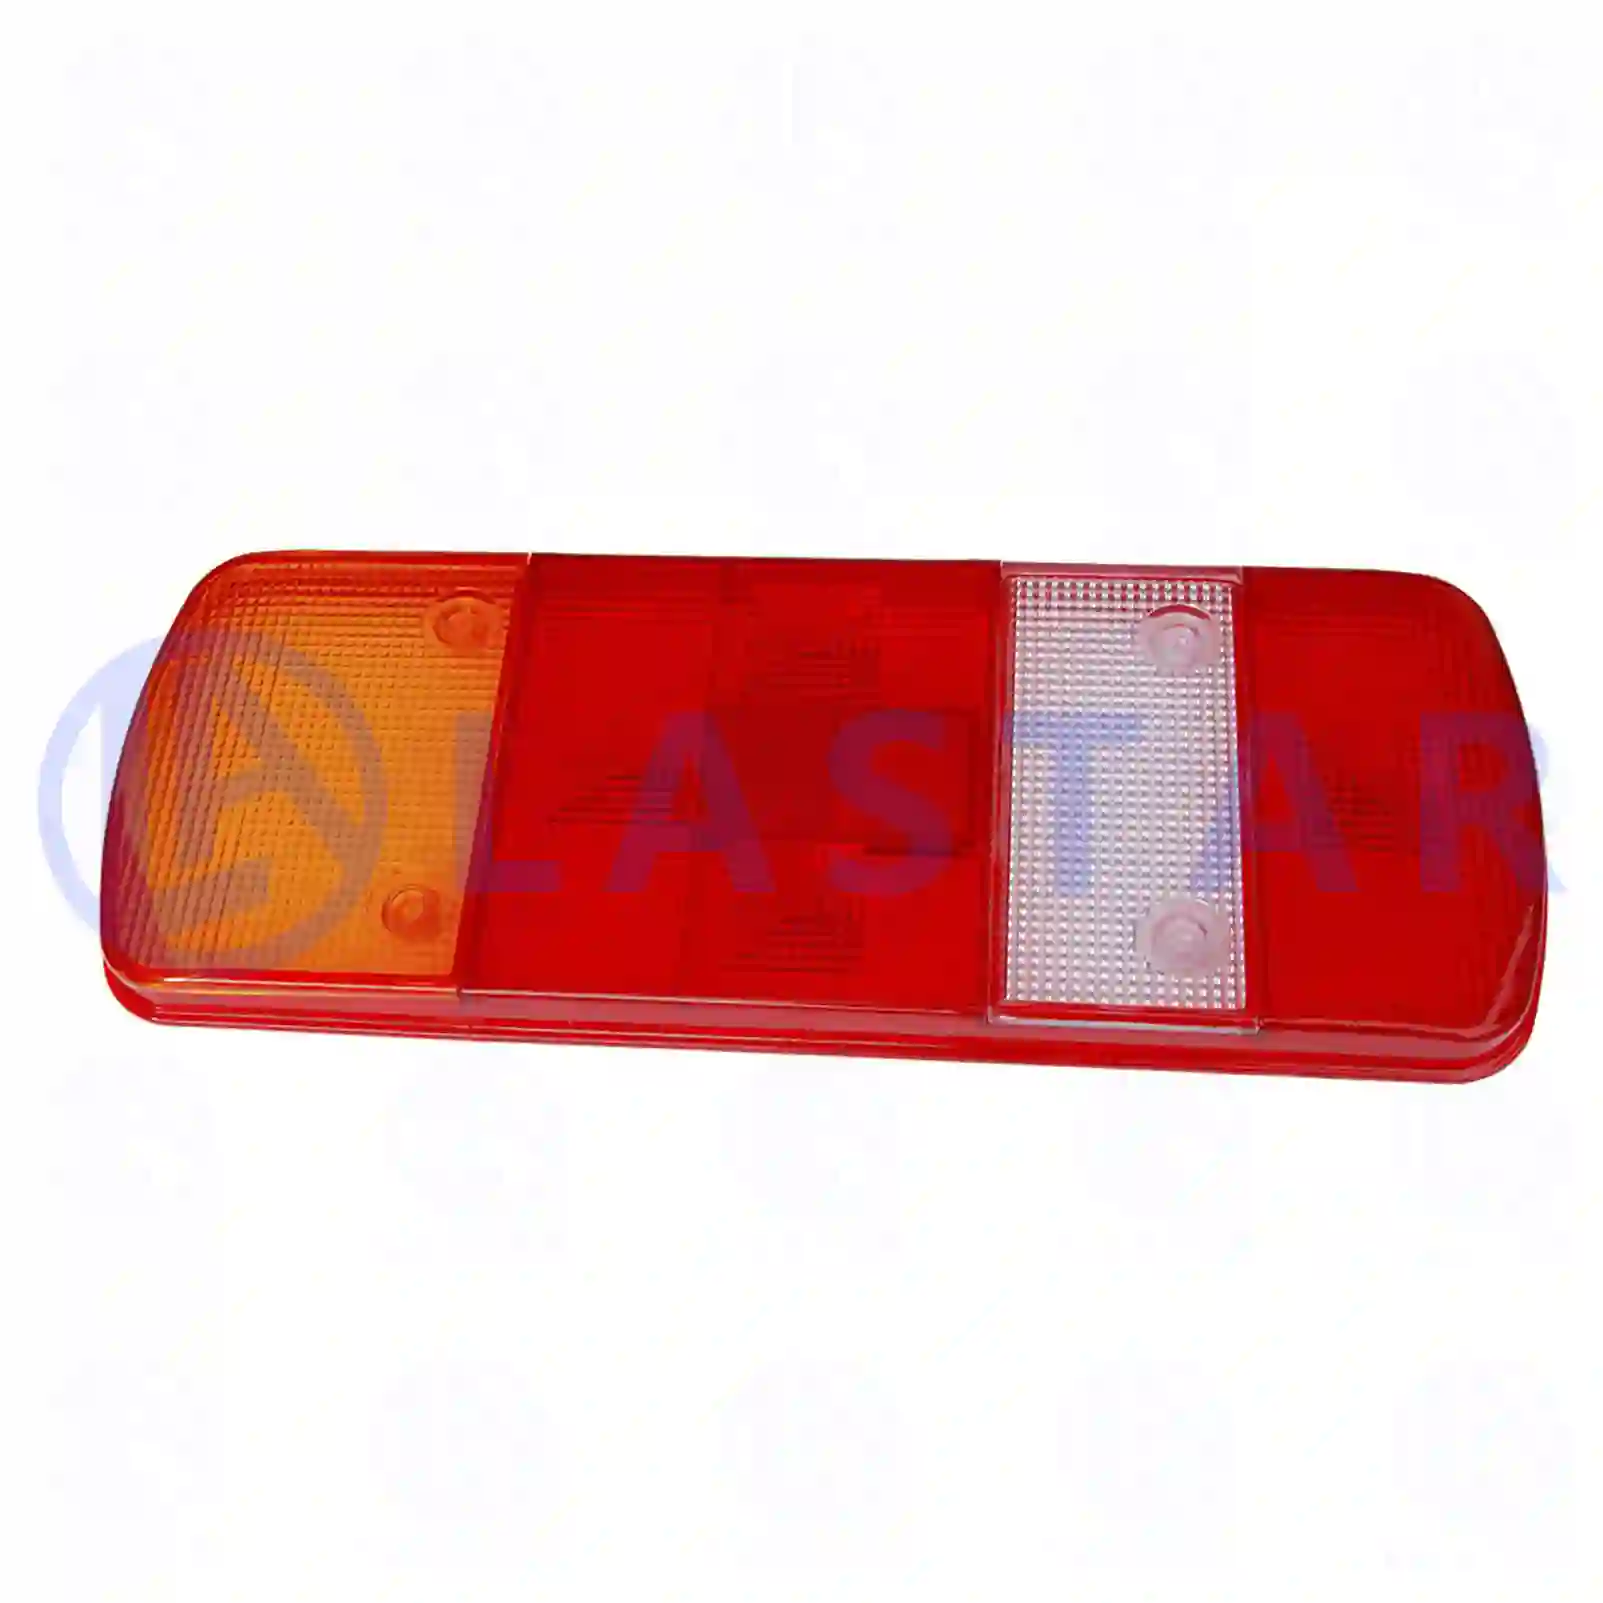 Tail lamp glass, 77710397, 81252256538, 0025446190, 20360571 ||  77710397 Lastar Spare Part | Truck Spare Parts, Auotomotive Spare Parts Tail lamp glass, 77710397, 81252256538, 0025446190, 20360571 ||  77710397 Lastar Spare Part | Truck Spare Parts, Auotomotive Spare Parts